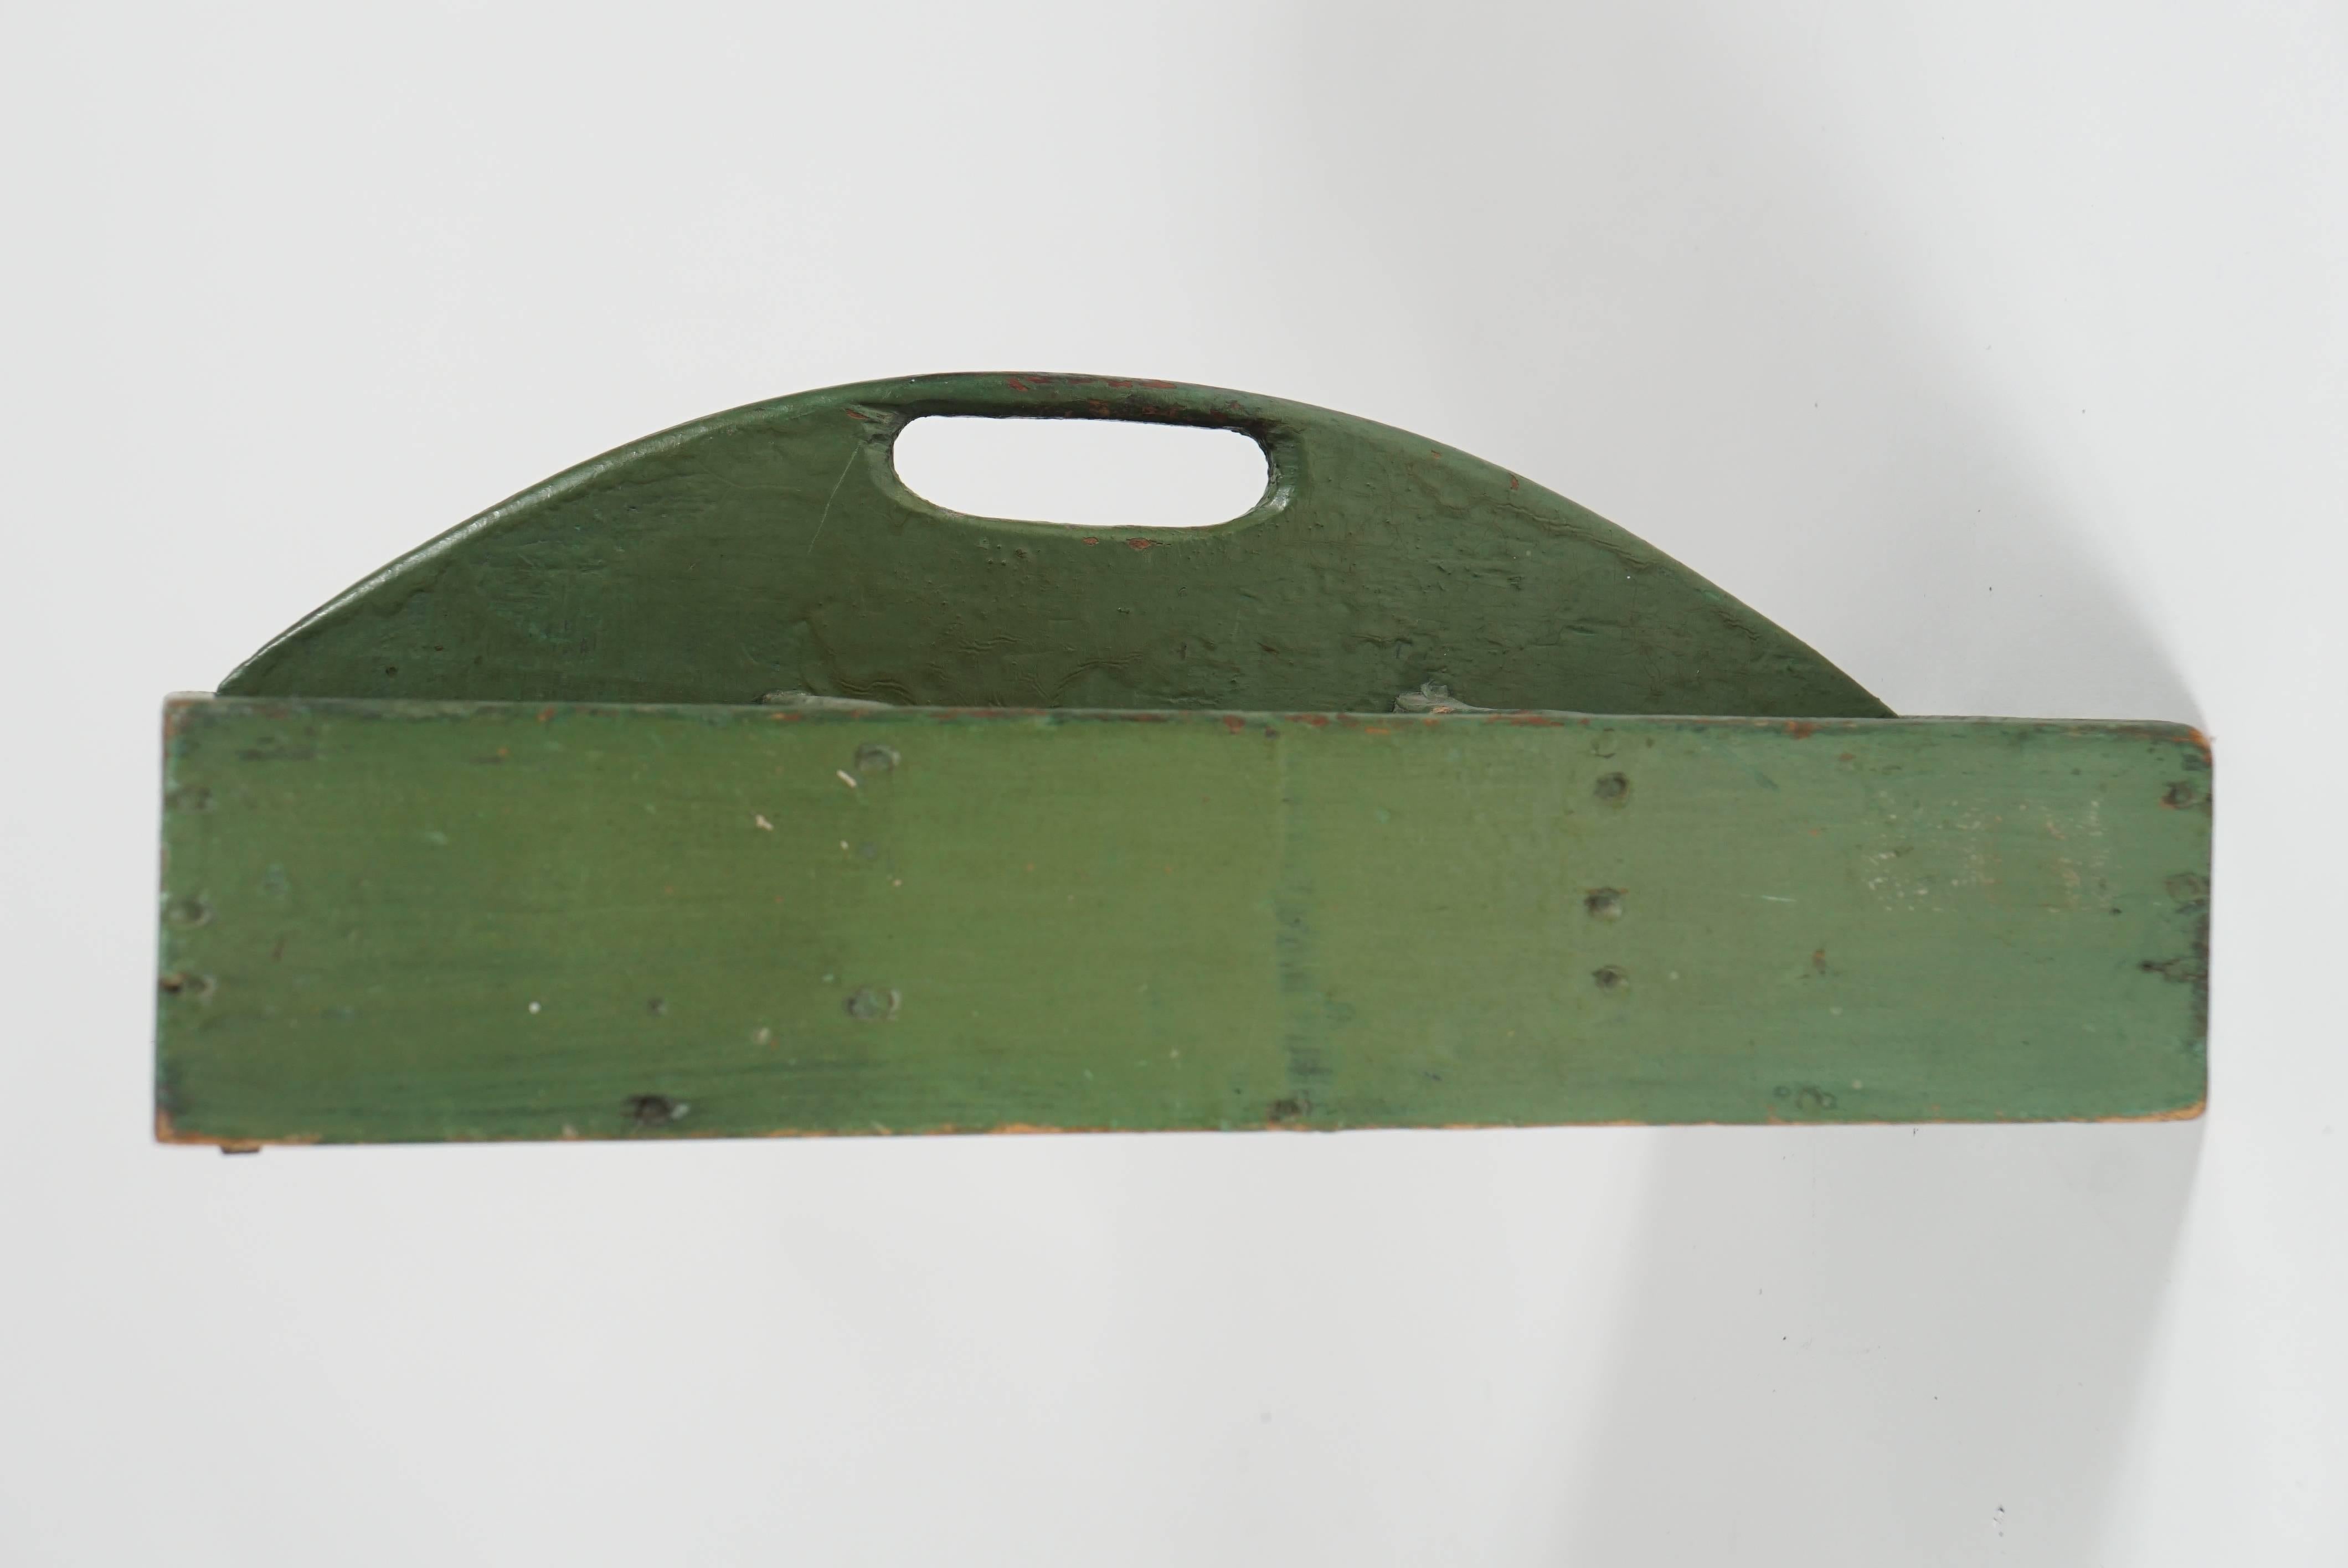 Painted Small Green Tool Box or Hanging Shelf For Sale